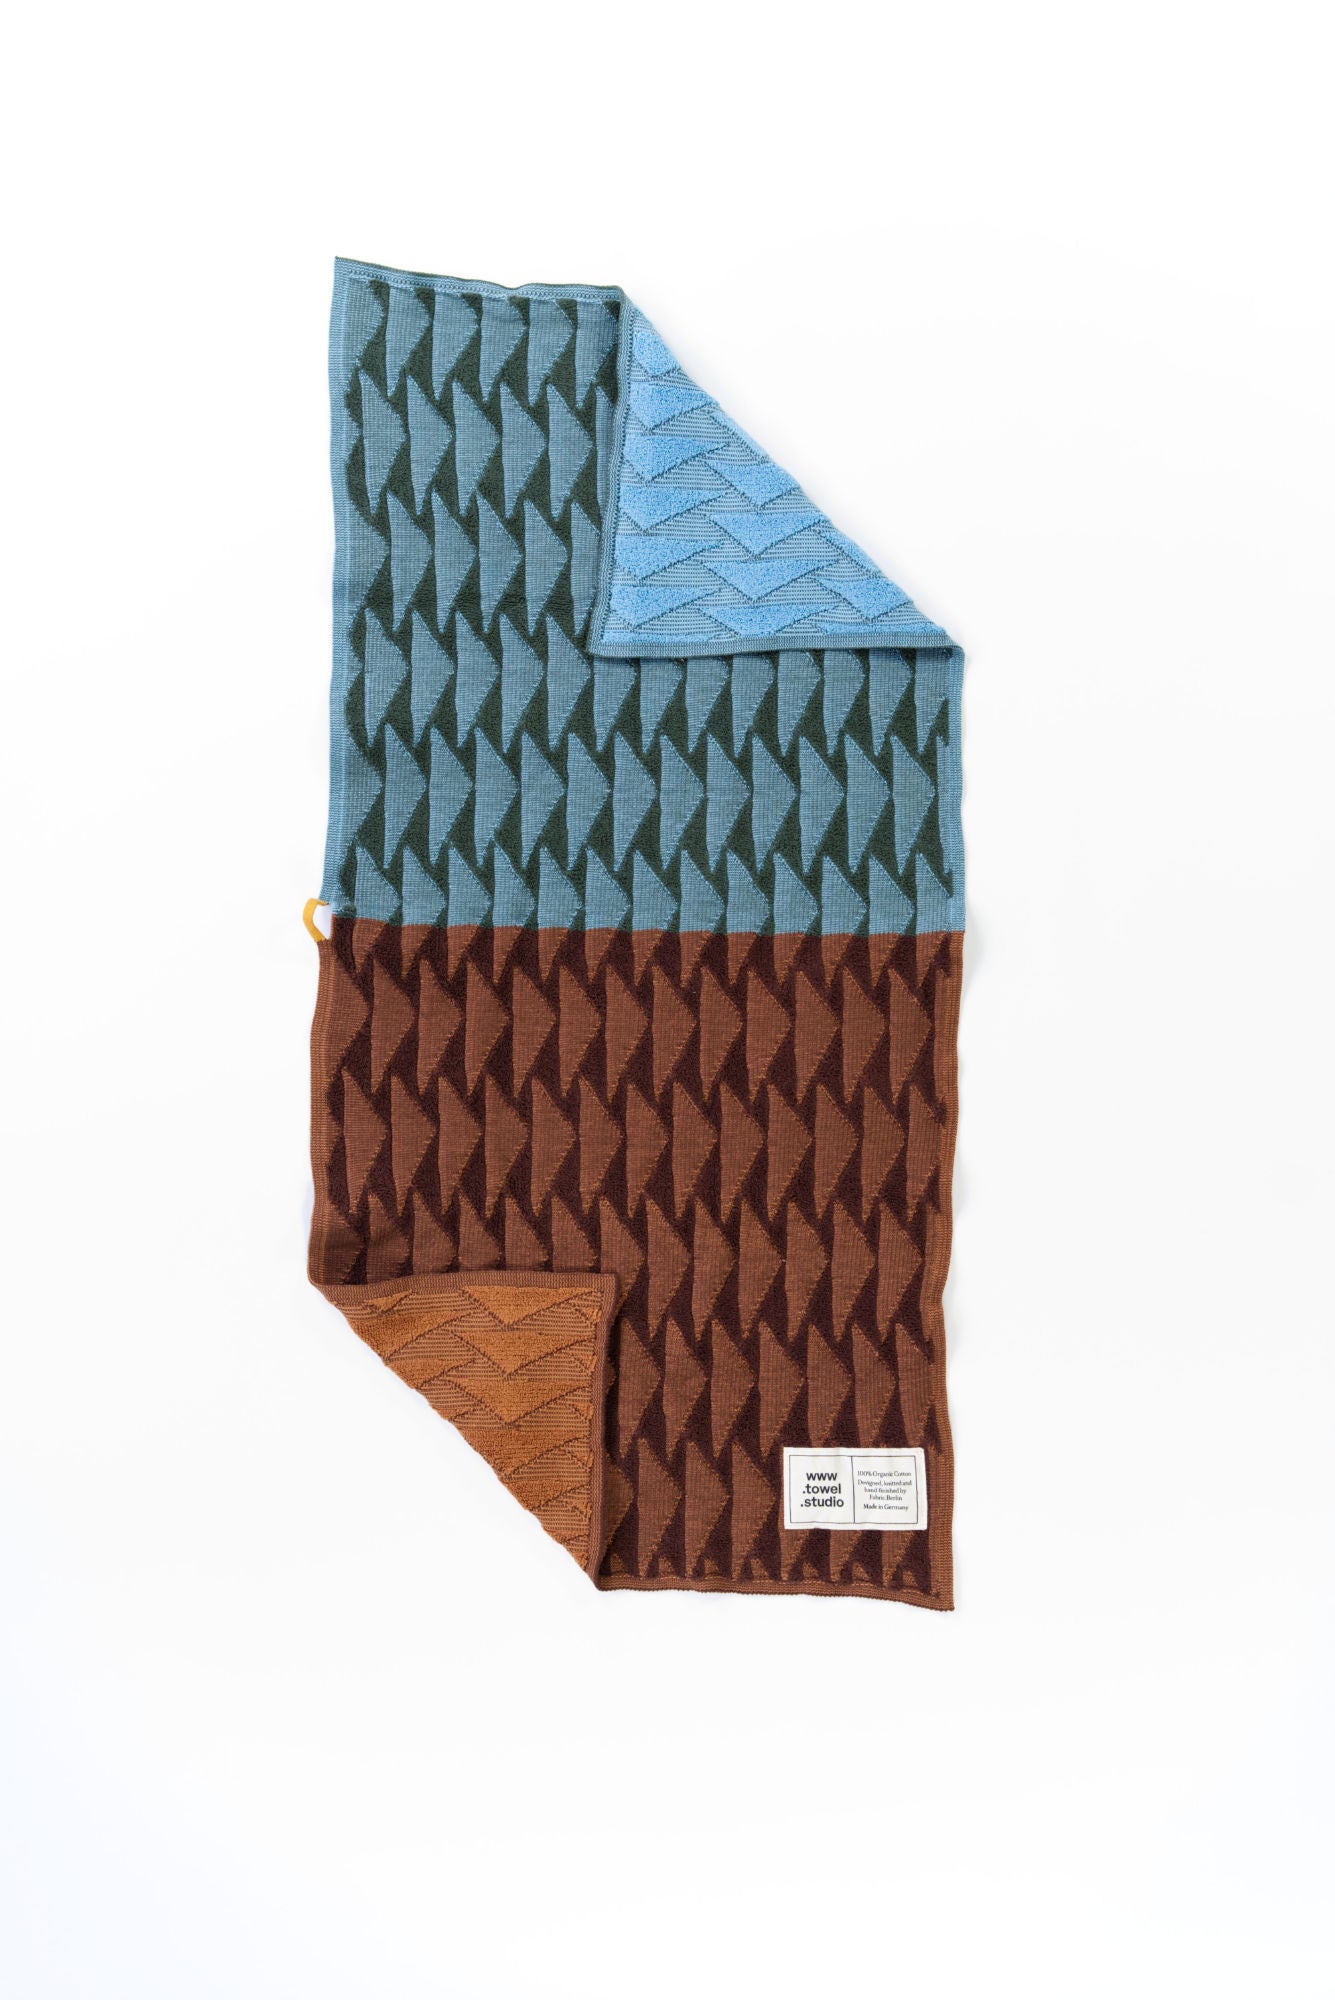 Forest Towel in Cocoa Teal